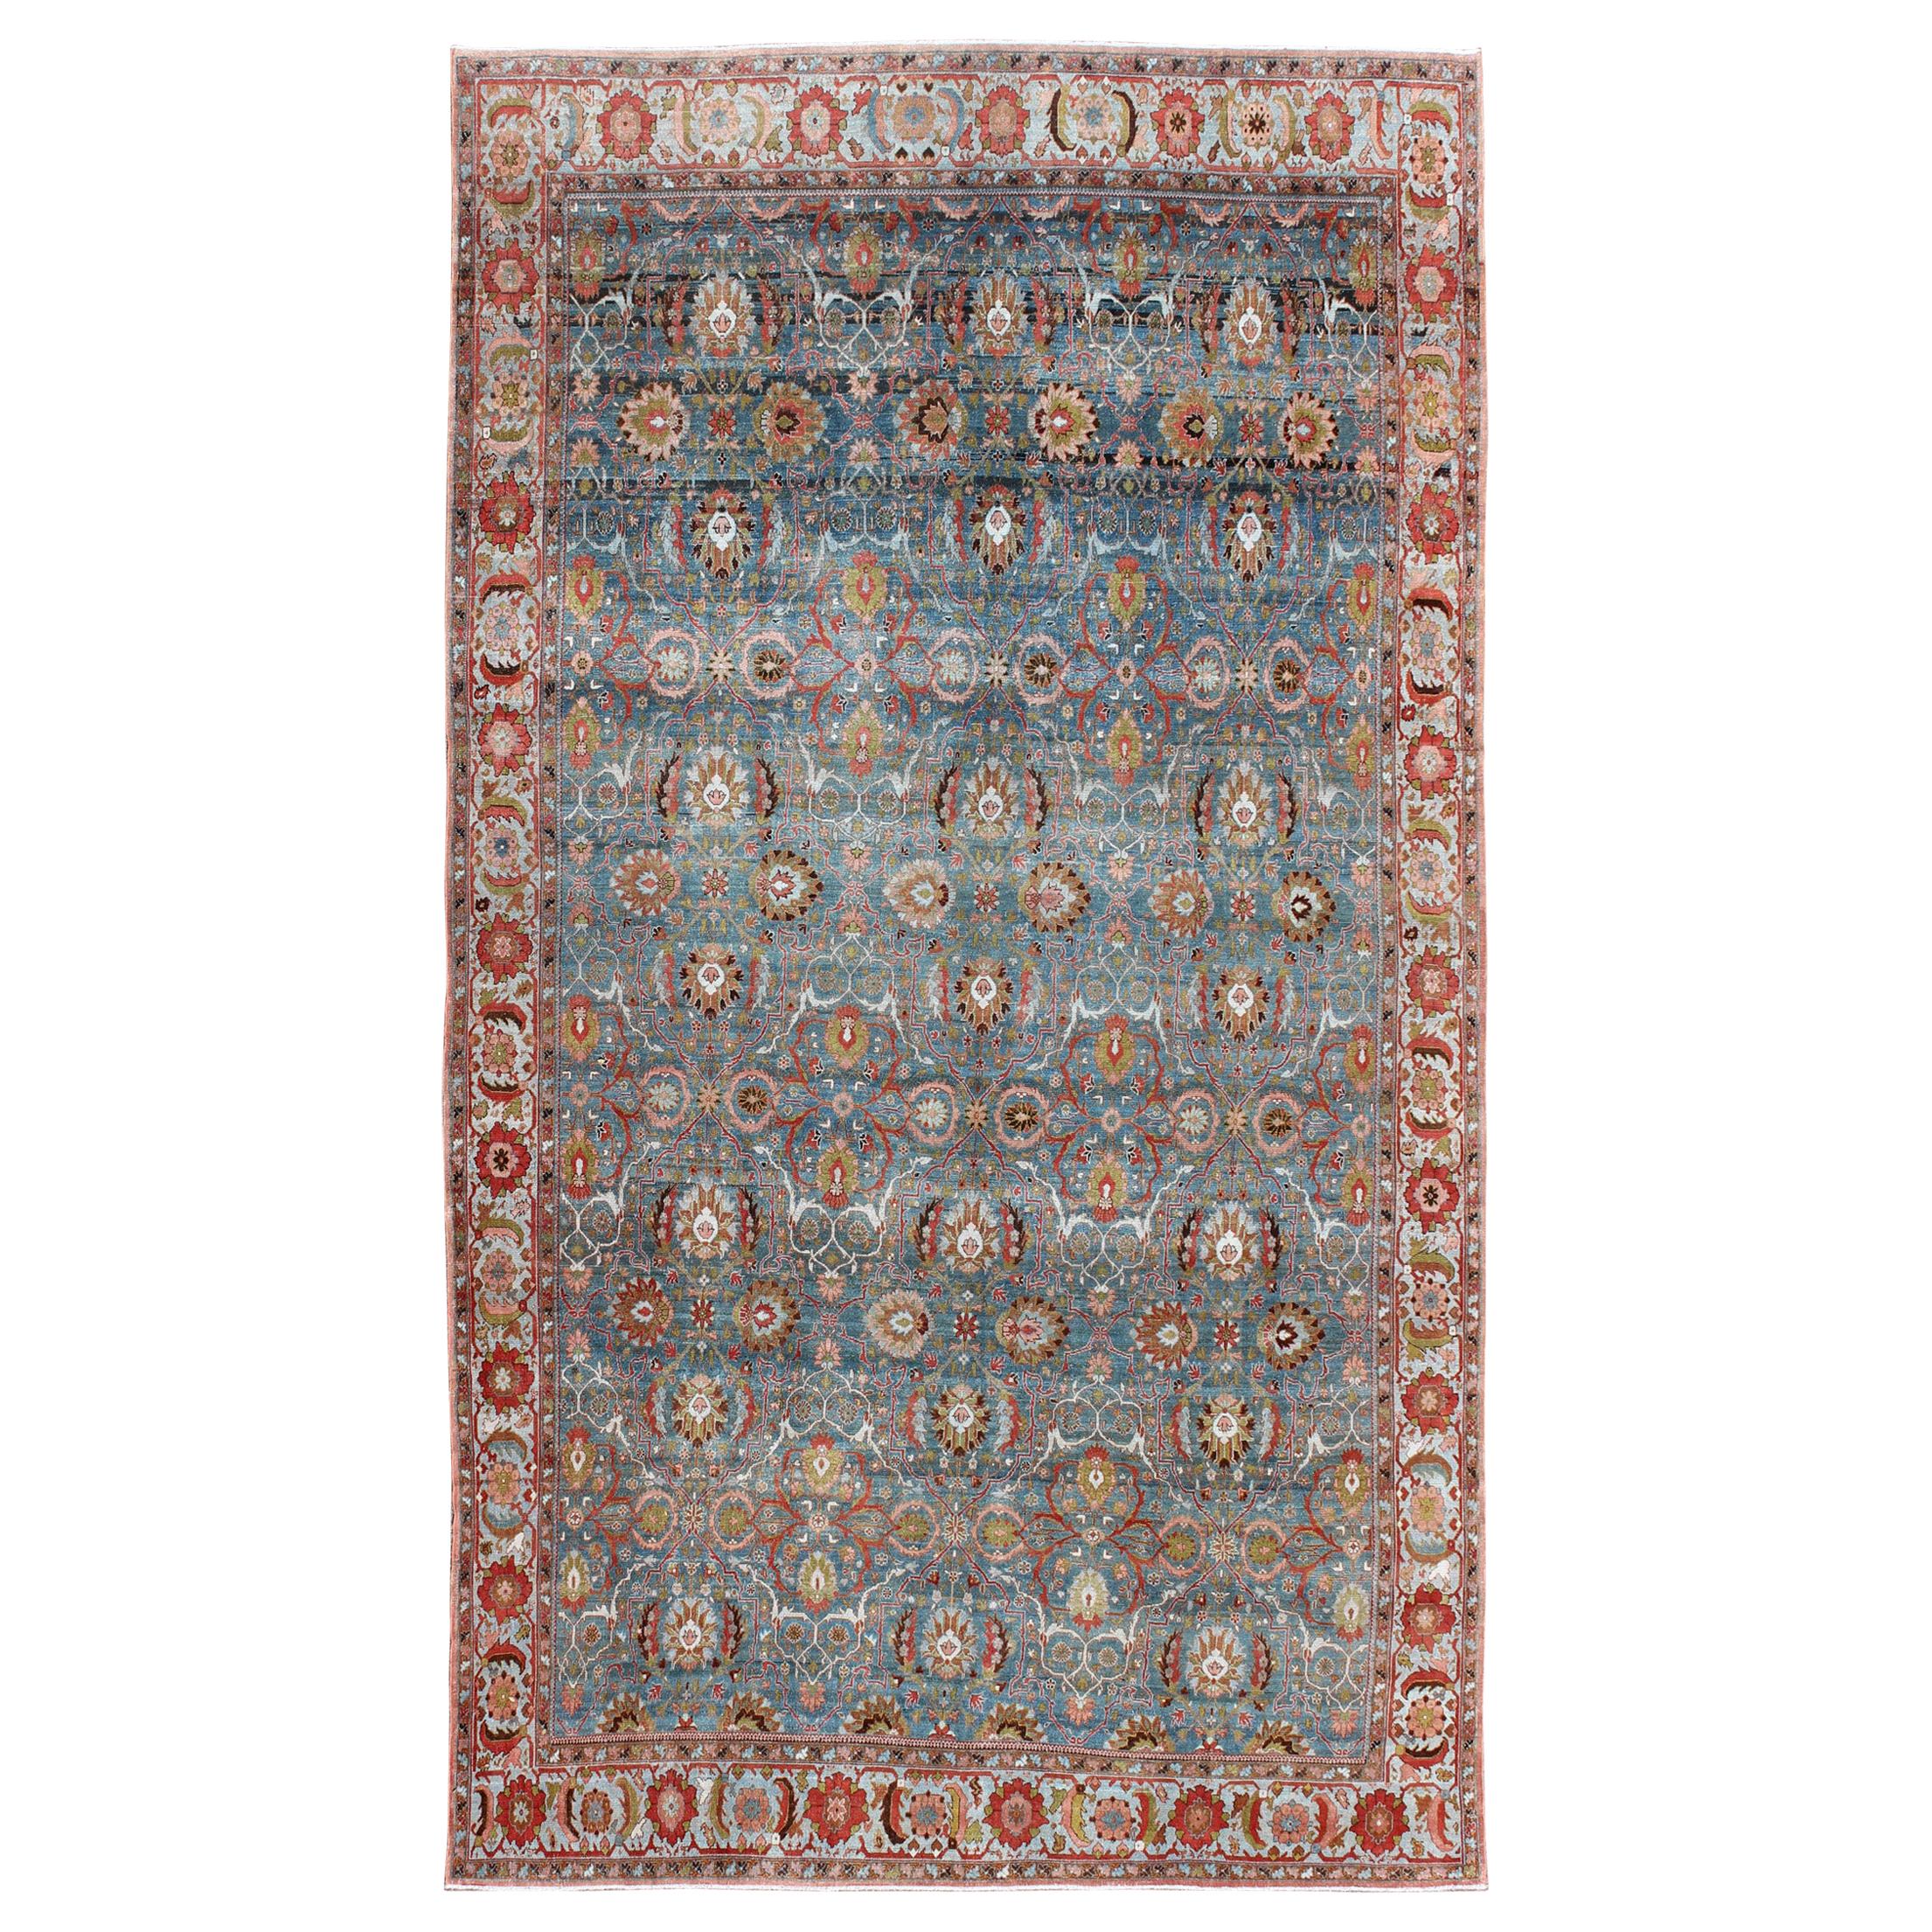 Antique Blue Background Persian Malayer Rug with Colorful Sub-Geometric Design